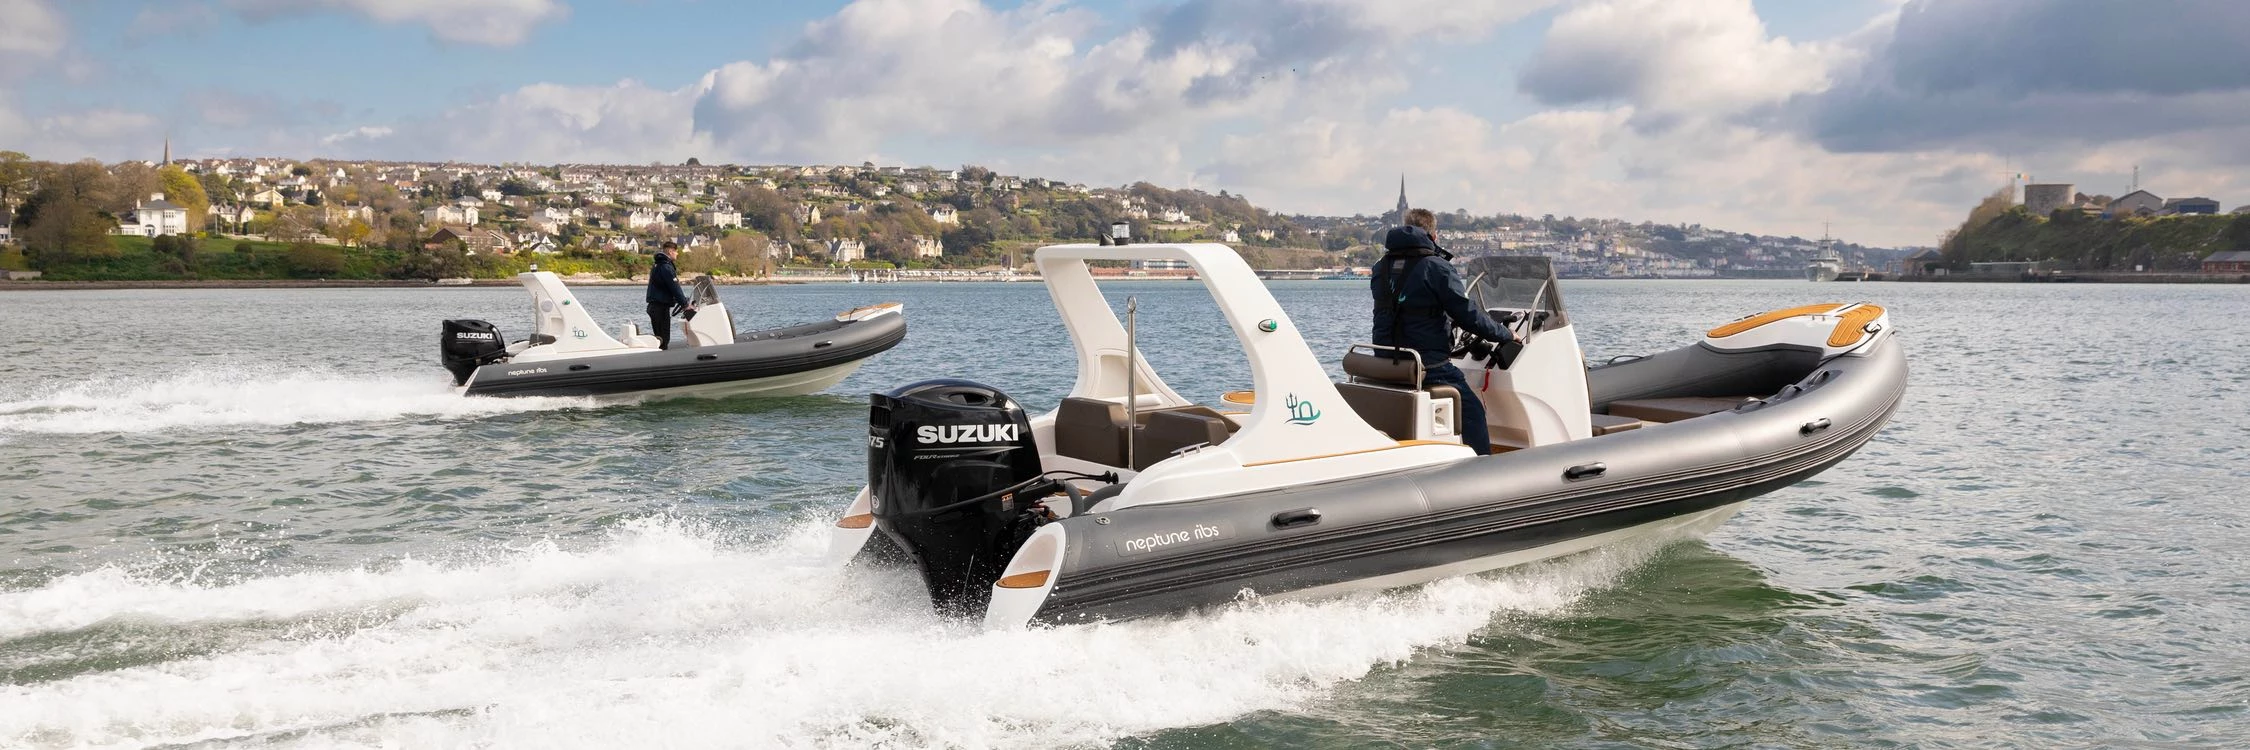 Two Neptune RIBs driving alongside each other, powered by Suzuki outboards